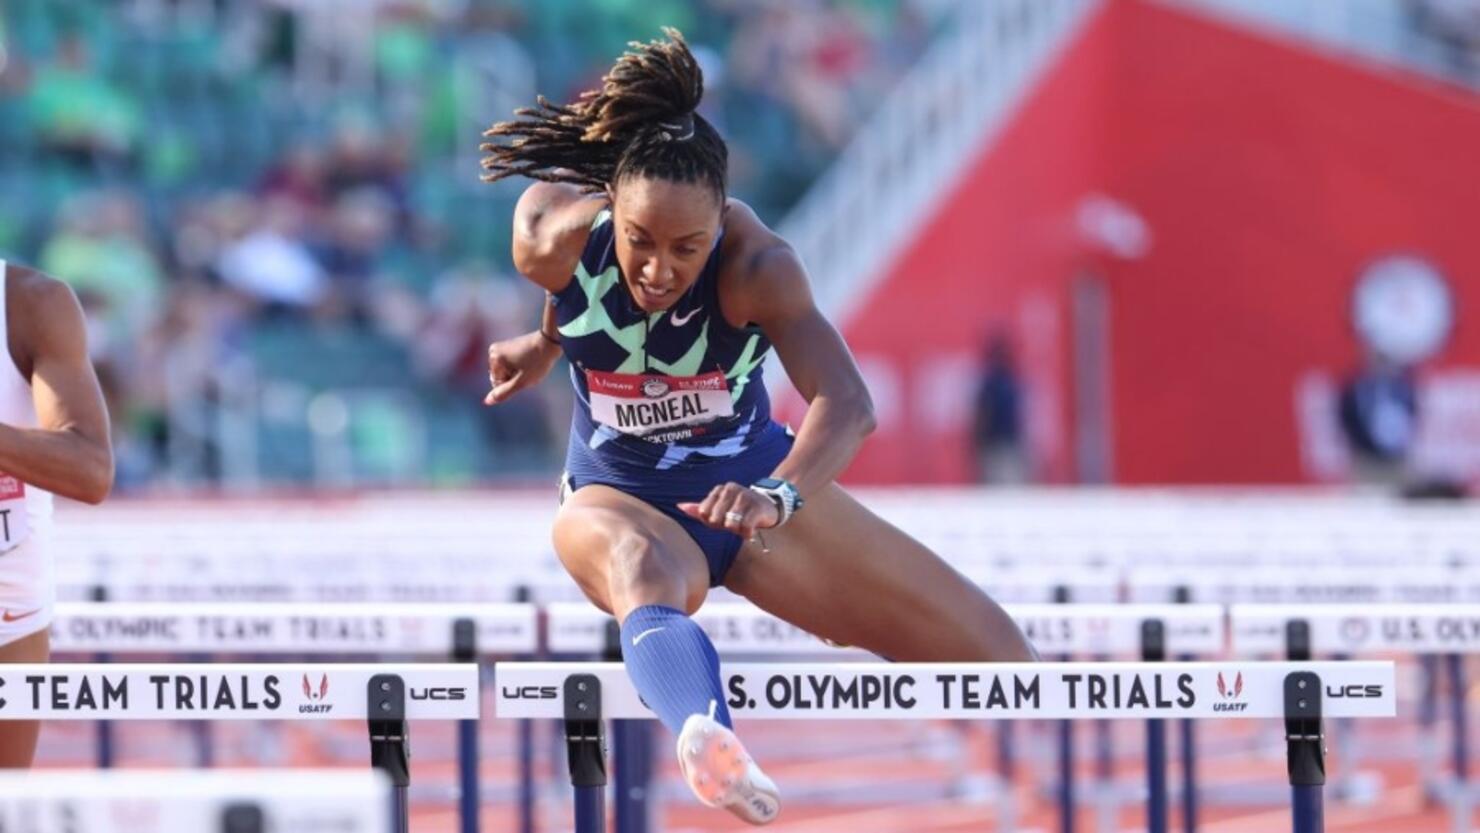 Black Women Athletes Across The Globe Hit With Penalties Ahead Of 